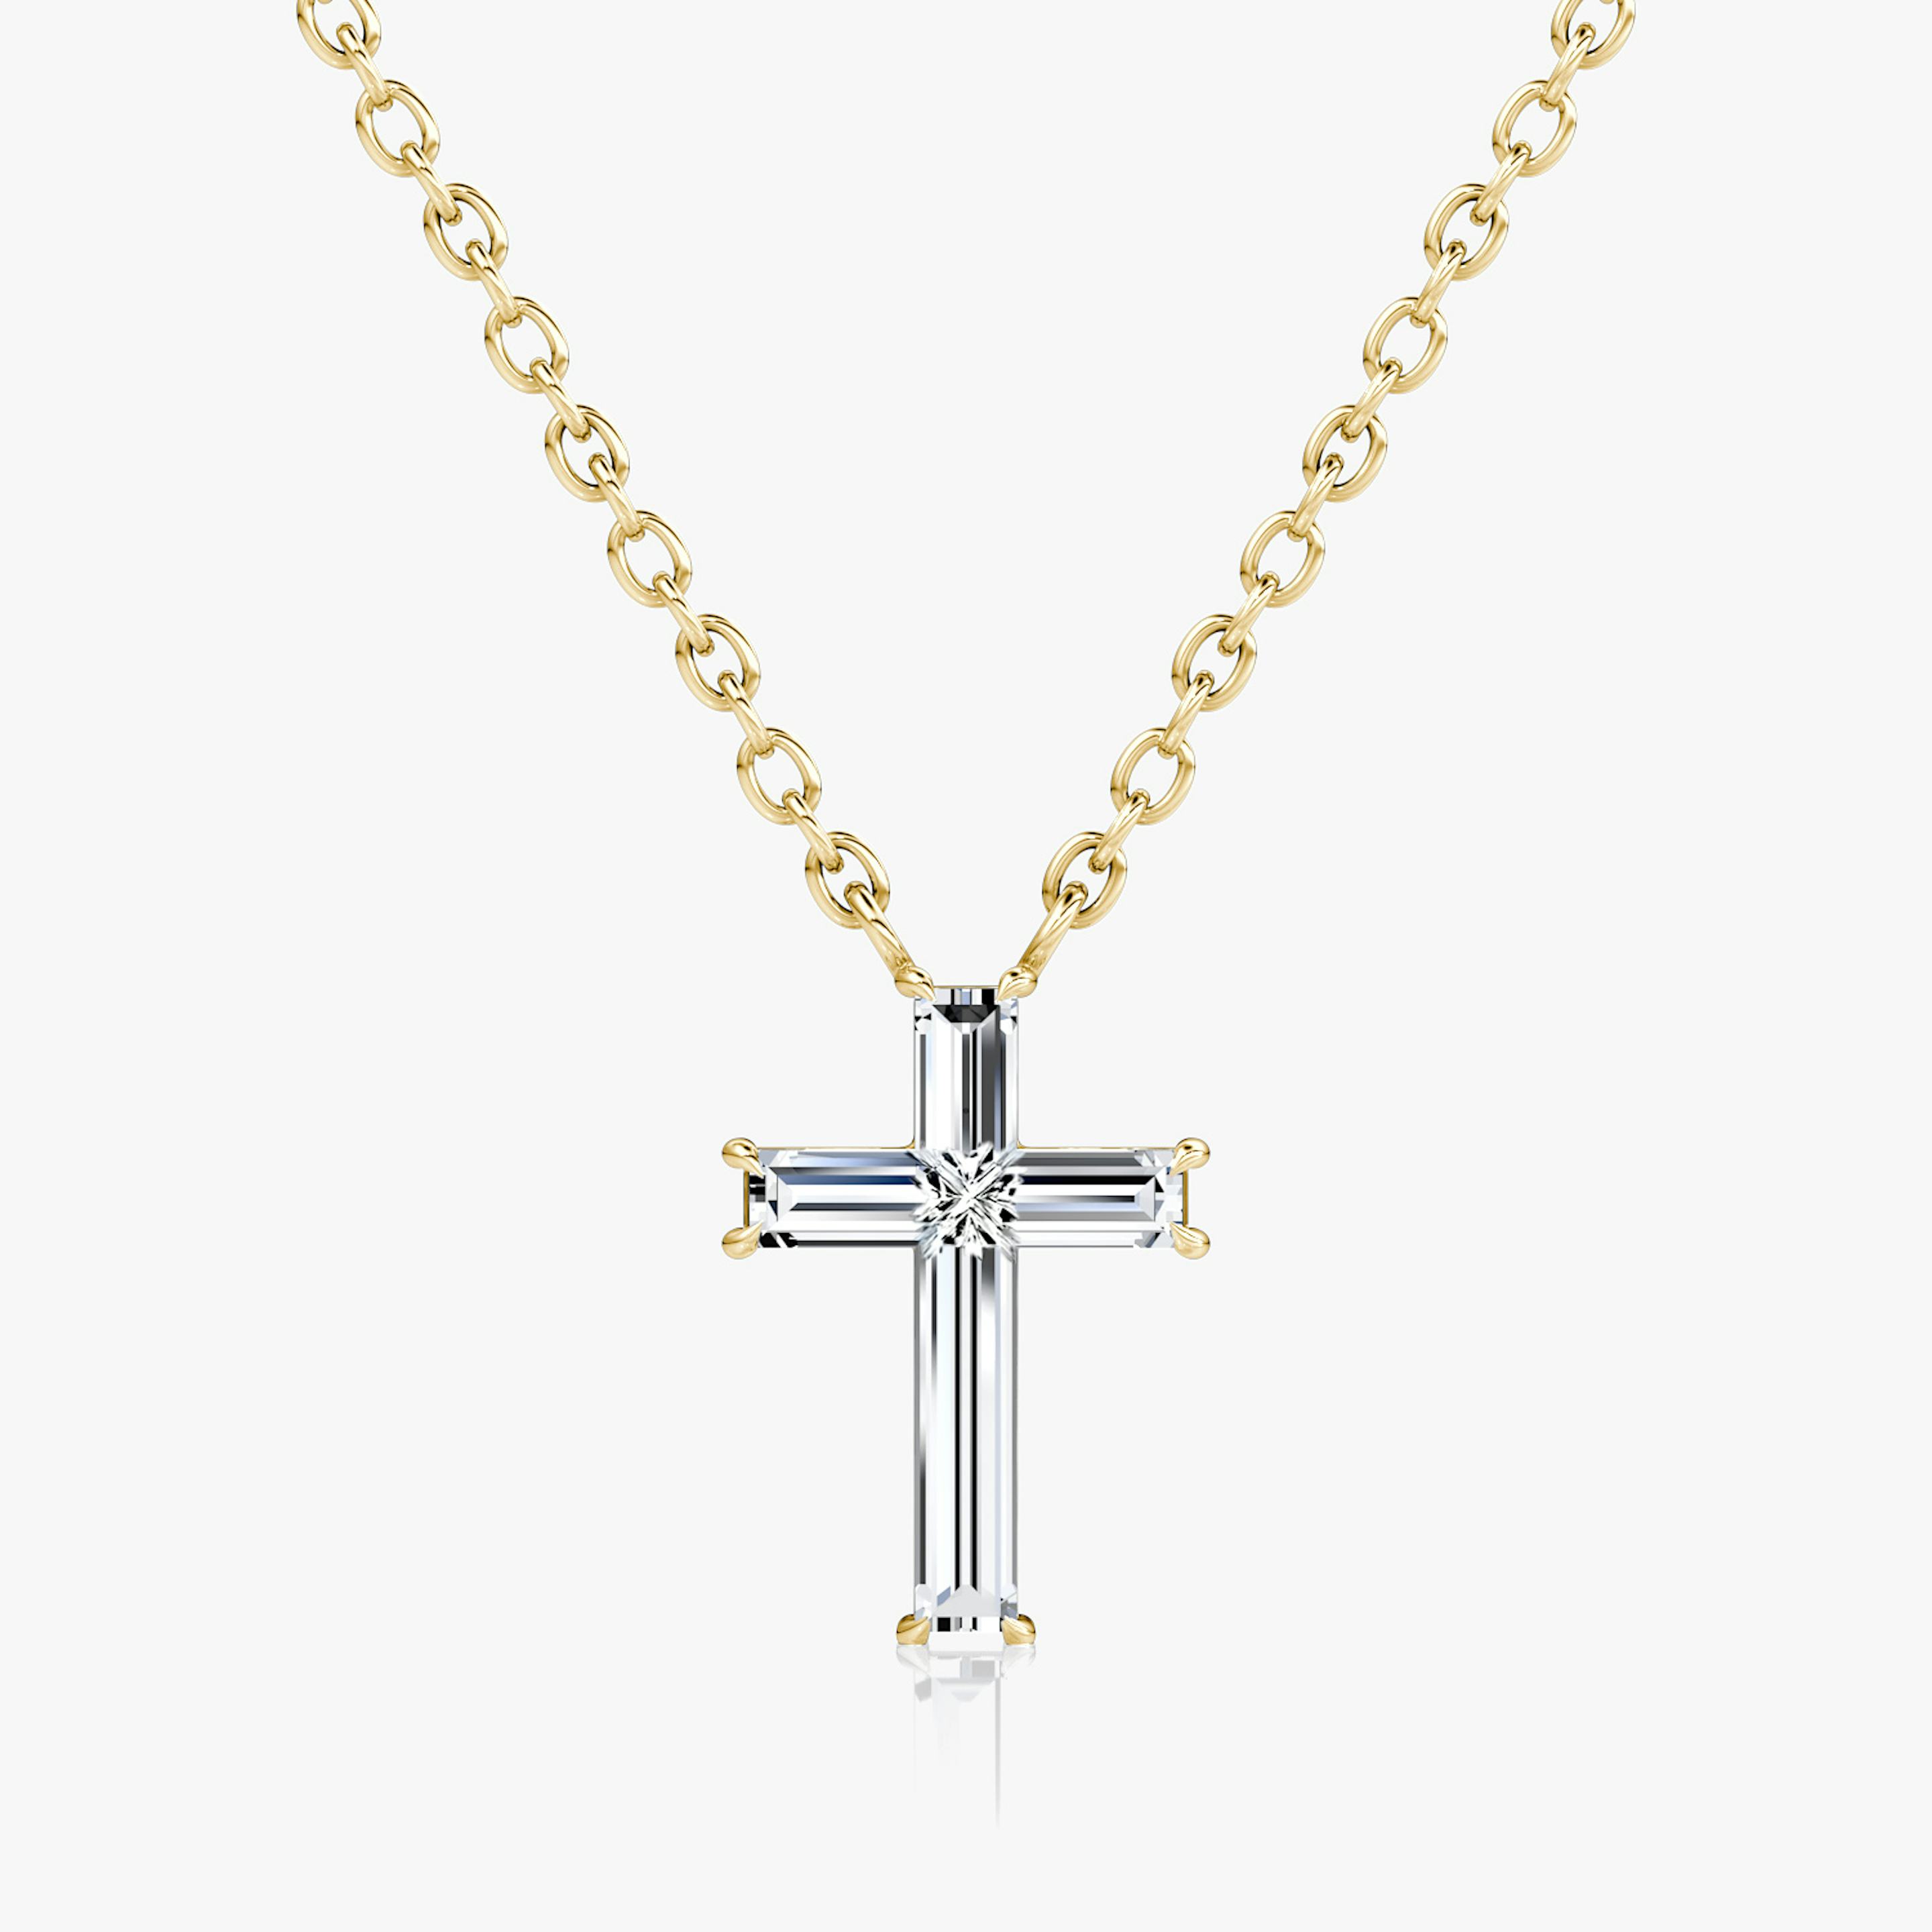 Petite Cross Necklace | 14k | 18k Yellow Gold | Chain length: 16-18